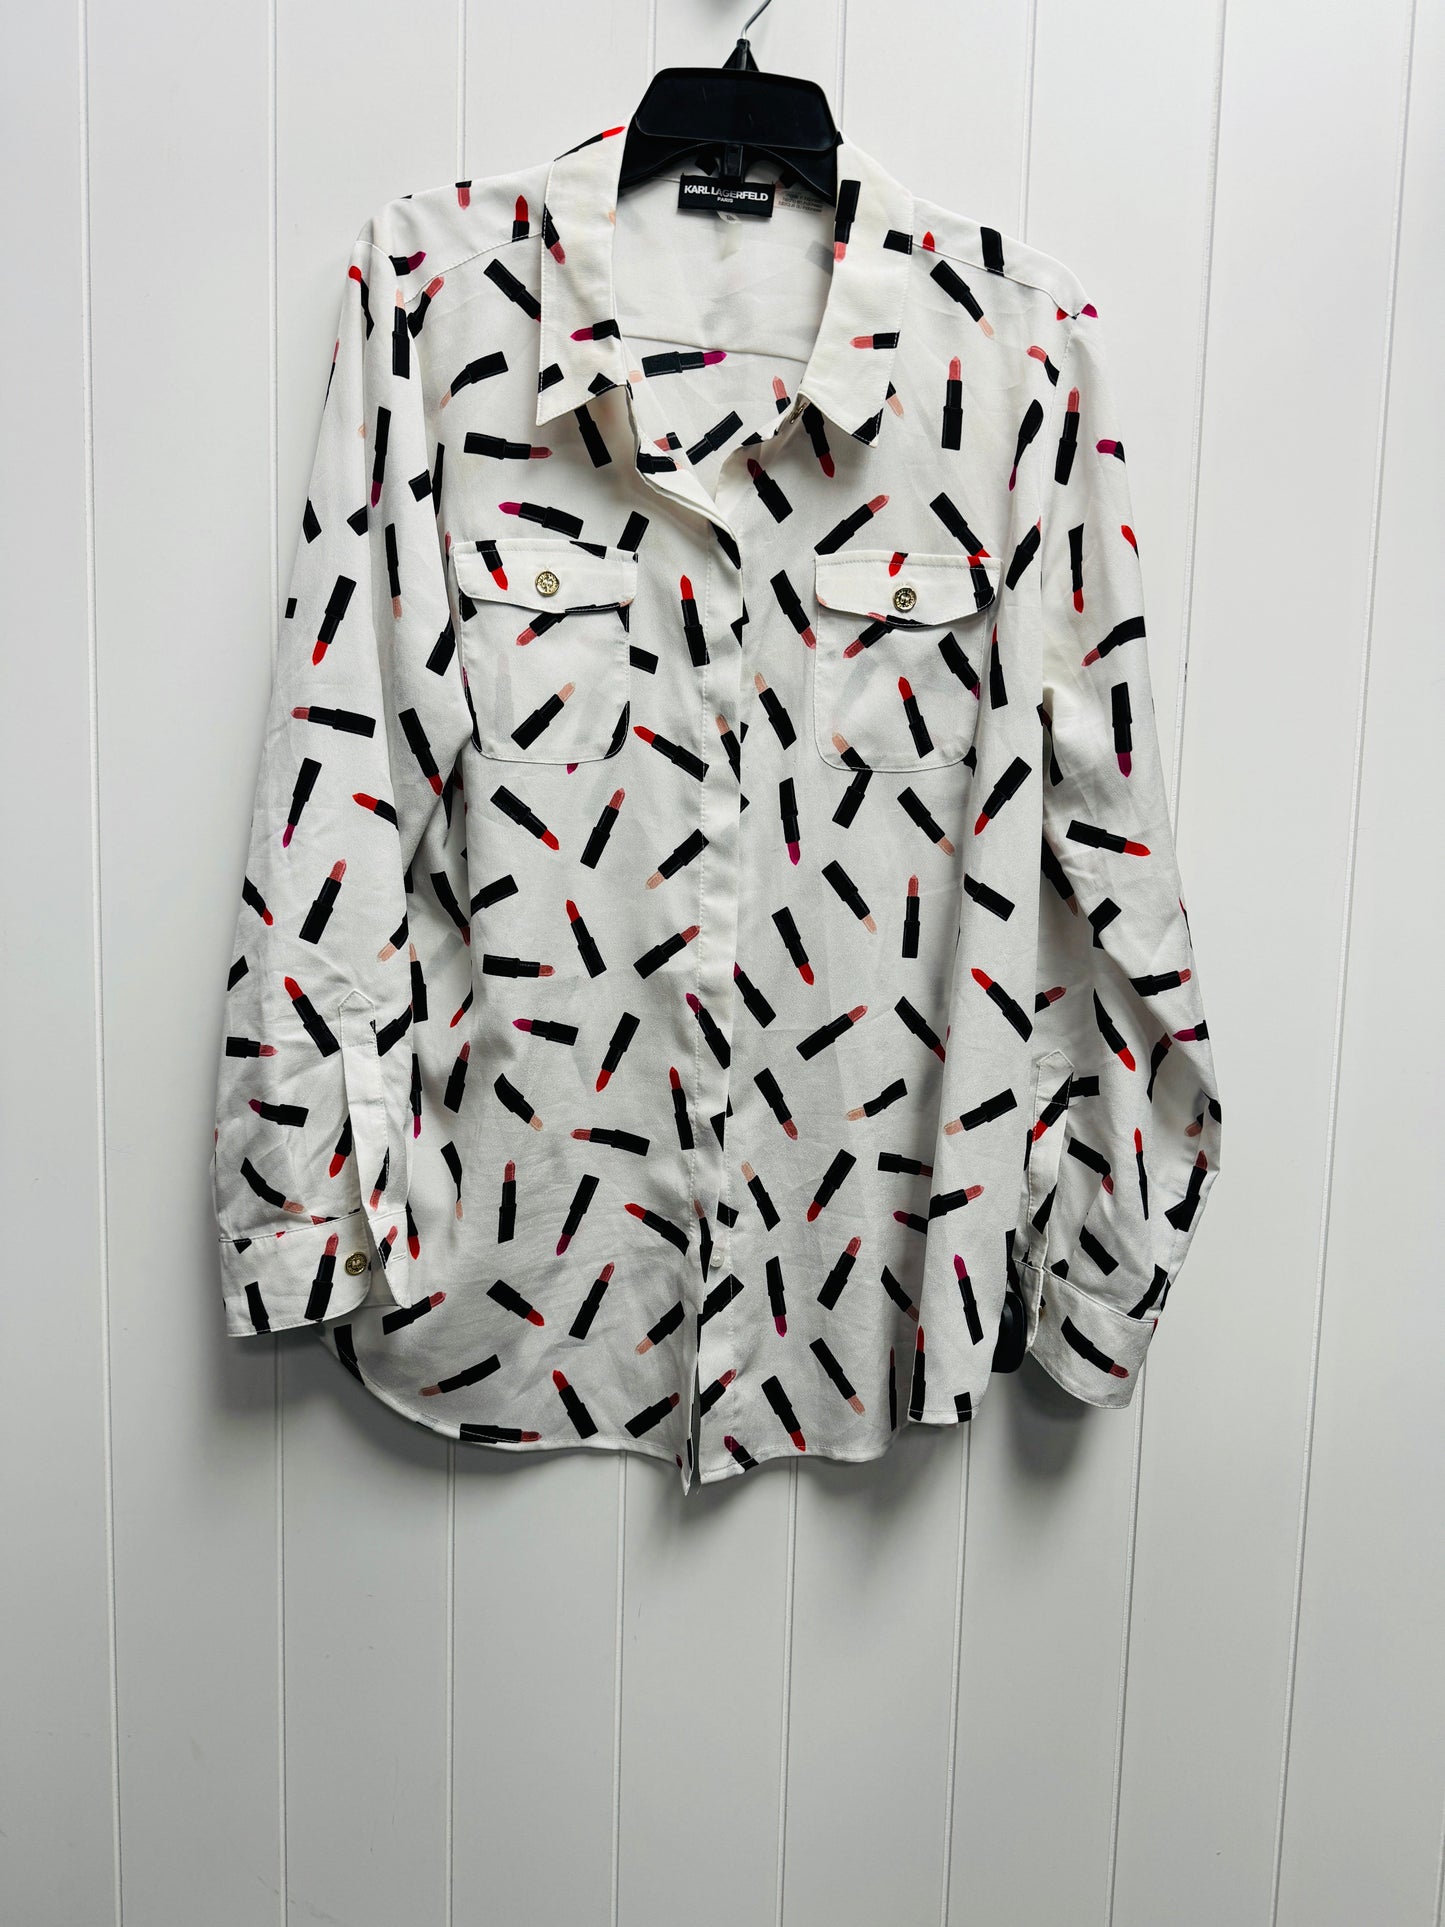 Pink & White Top Long Sleeve Karl Lagerfeld, Size Xl